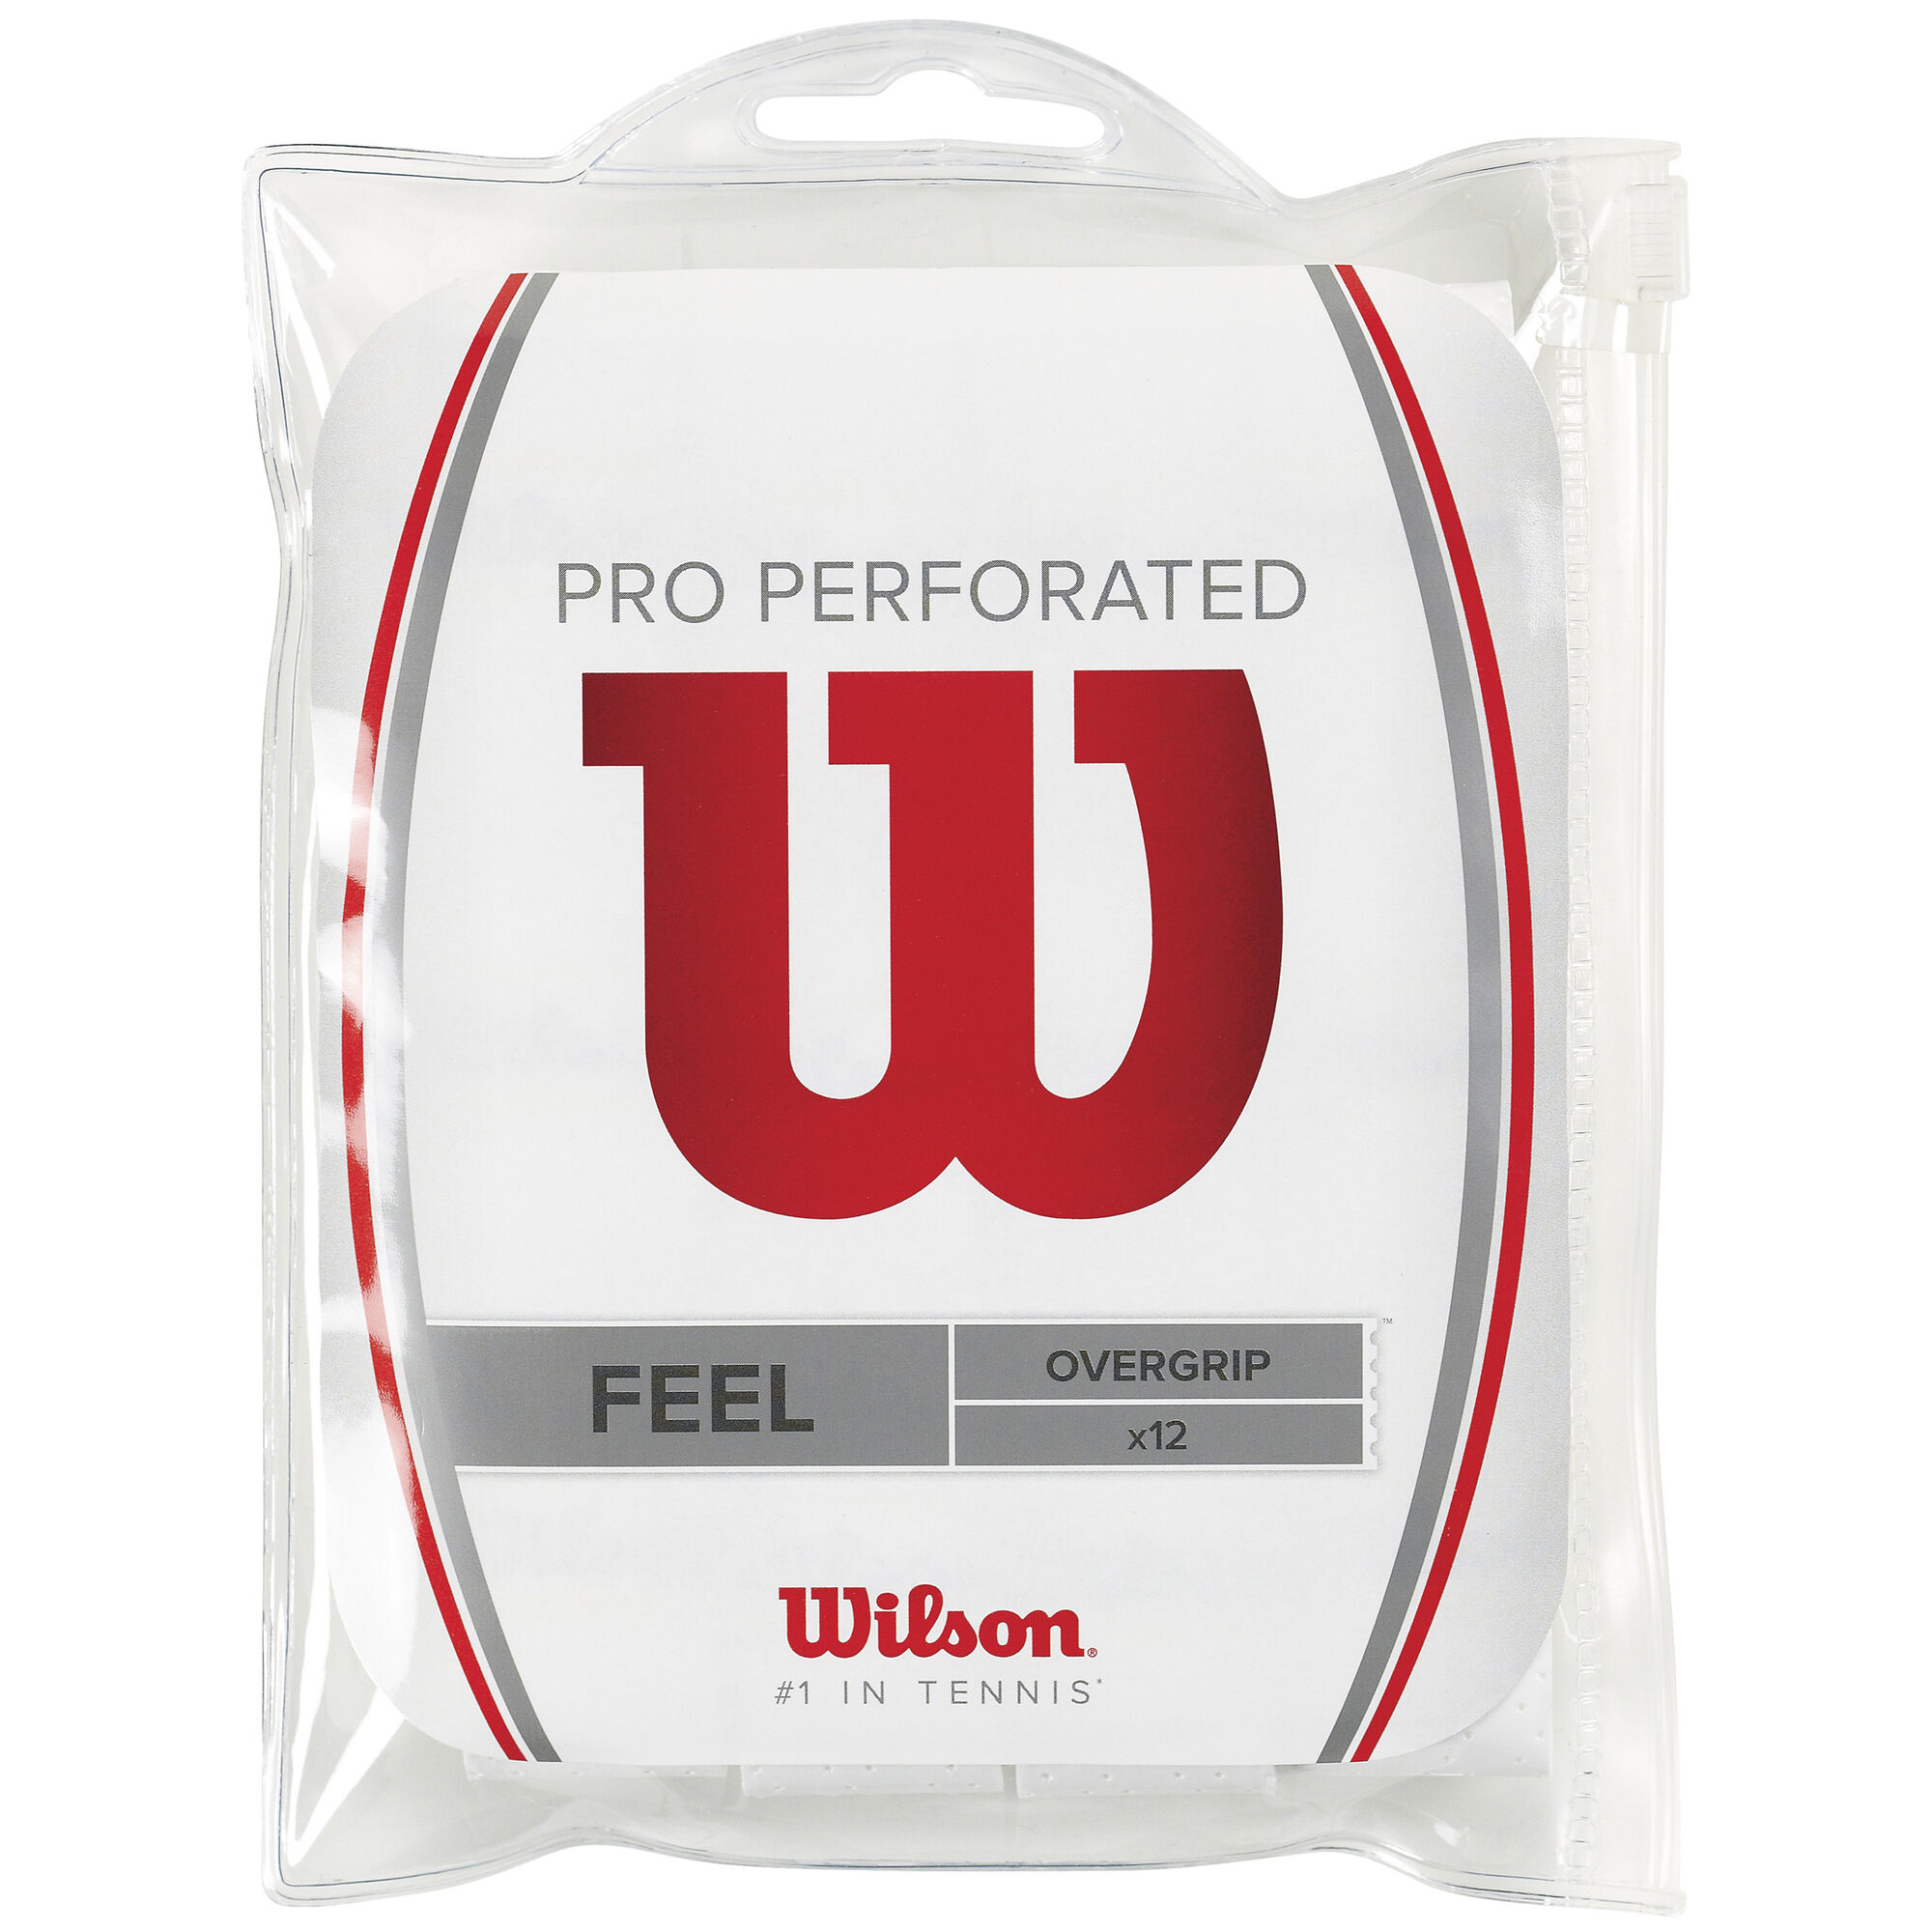  Wilson Pro Perforated Tennis Racket Overgrip Pro Perforated,  White, Pack of 60 : Sports & Outdoors